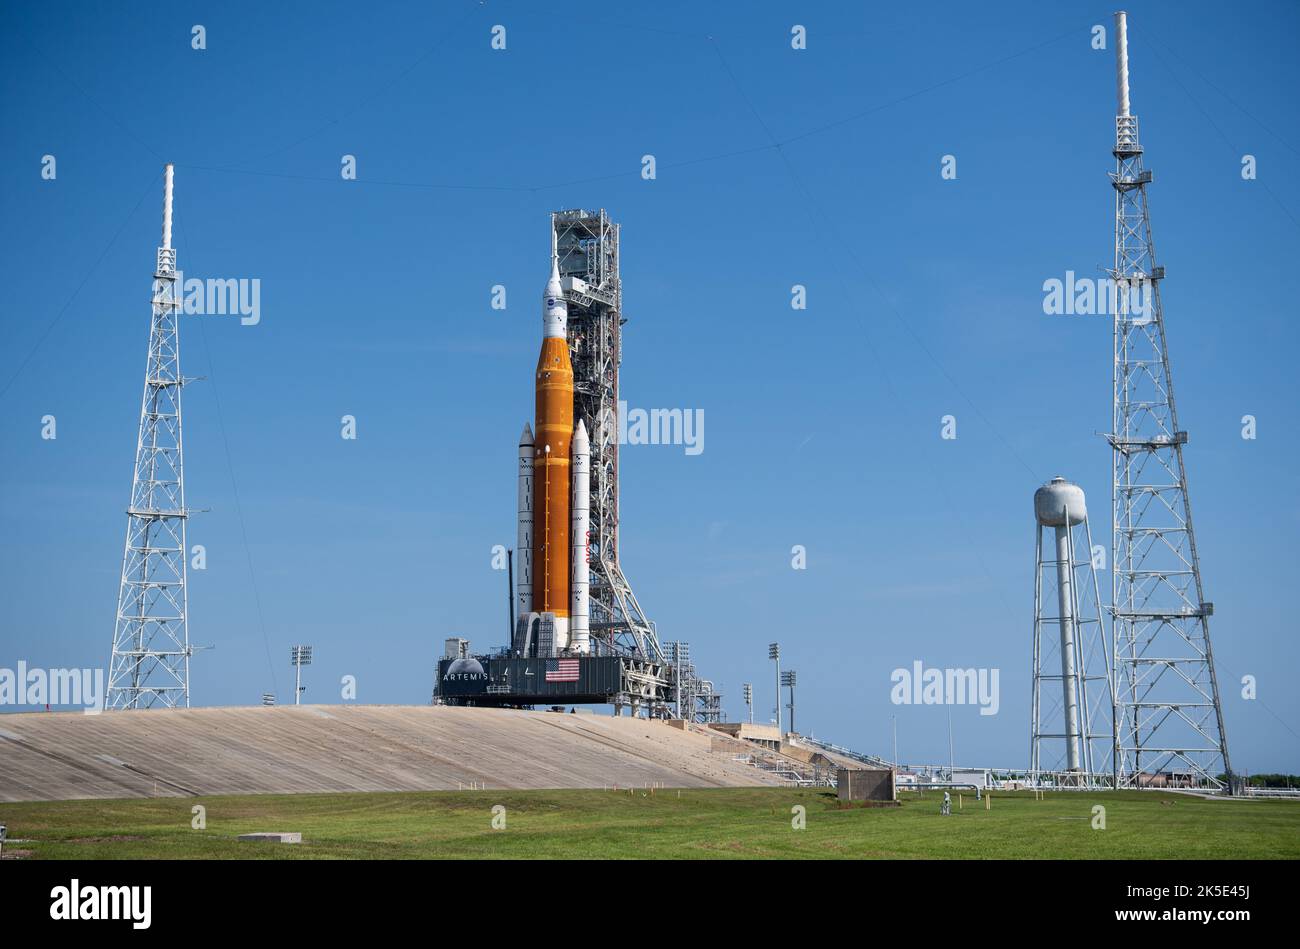 NASA's Space Launch System (SLS) rocket with the Orion spacecraft aboard is seen atop a mobile launcher at Launch Pad 39B, 18 August 2022, after being rolled out to the launch pad at NASA's Kennedy Space Center, Florida. NASA's Artemis I mission - the first integrated test of the agency's deep space exploration systems: the Orion spacecraft, SLS rocket, and supporting ground systems. Launch of the uncrewed flight test was postponed. An optimised version of an original NASA image. Credit: NASA/JKowsky) Stock Photo